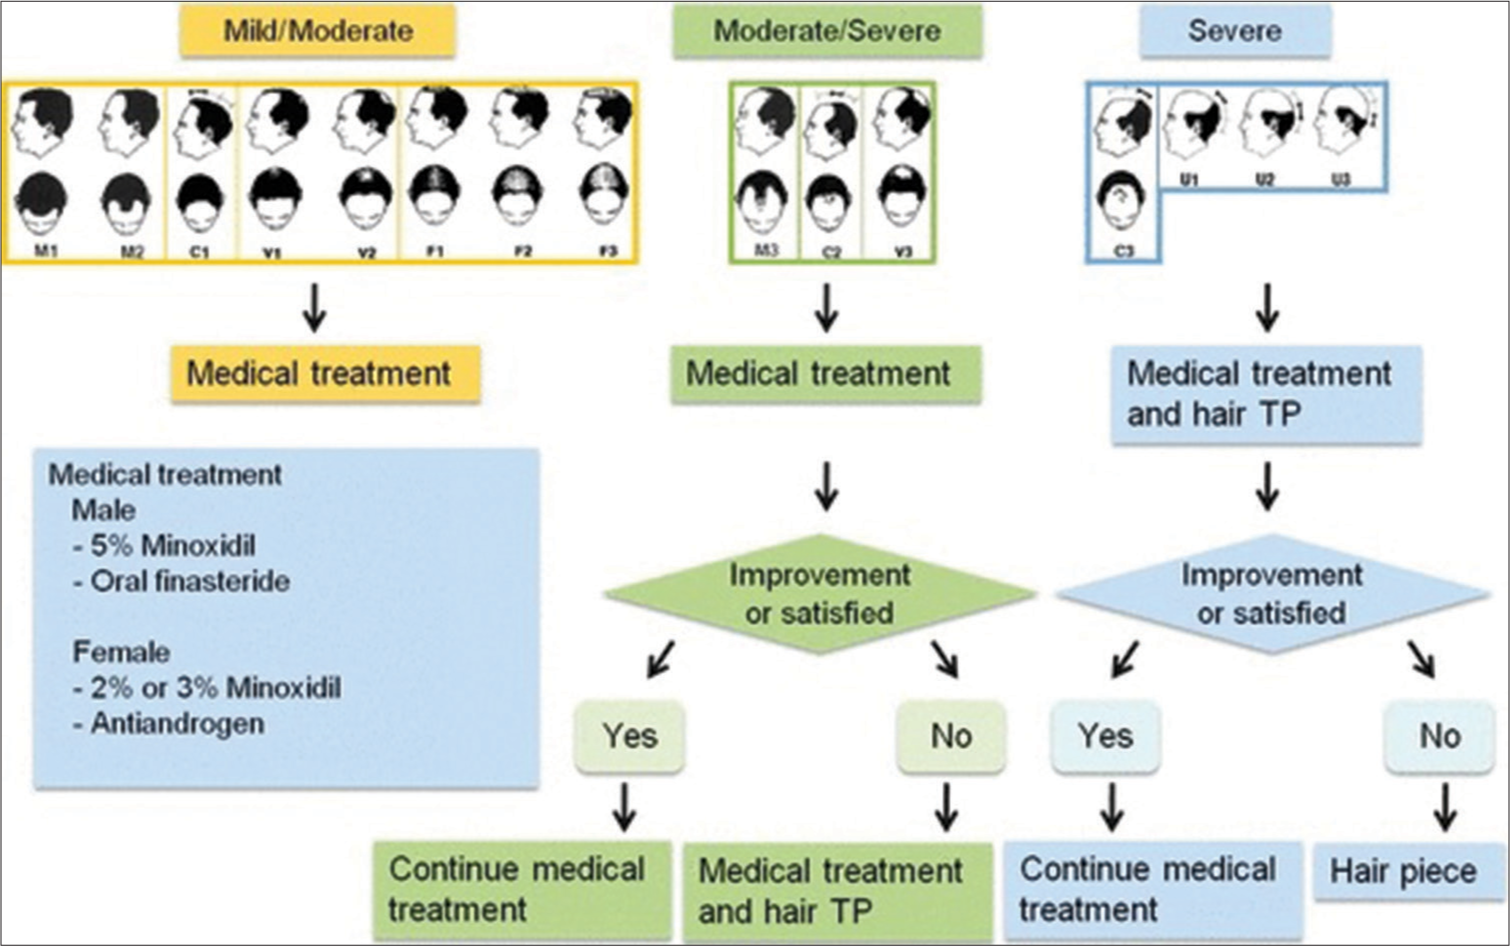 Algorithmic guideline for the management of androgenetic alopecia (AGA). Mild/moderate androgenetic = BASP type M1-2, C1, F1-3 or V1-2; moderate/severe AGA = BASP type M3, C2-3, U1-3 or V3; severe AGA = BASP type C3 or U1-3.